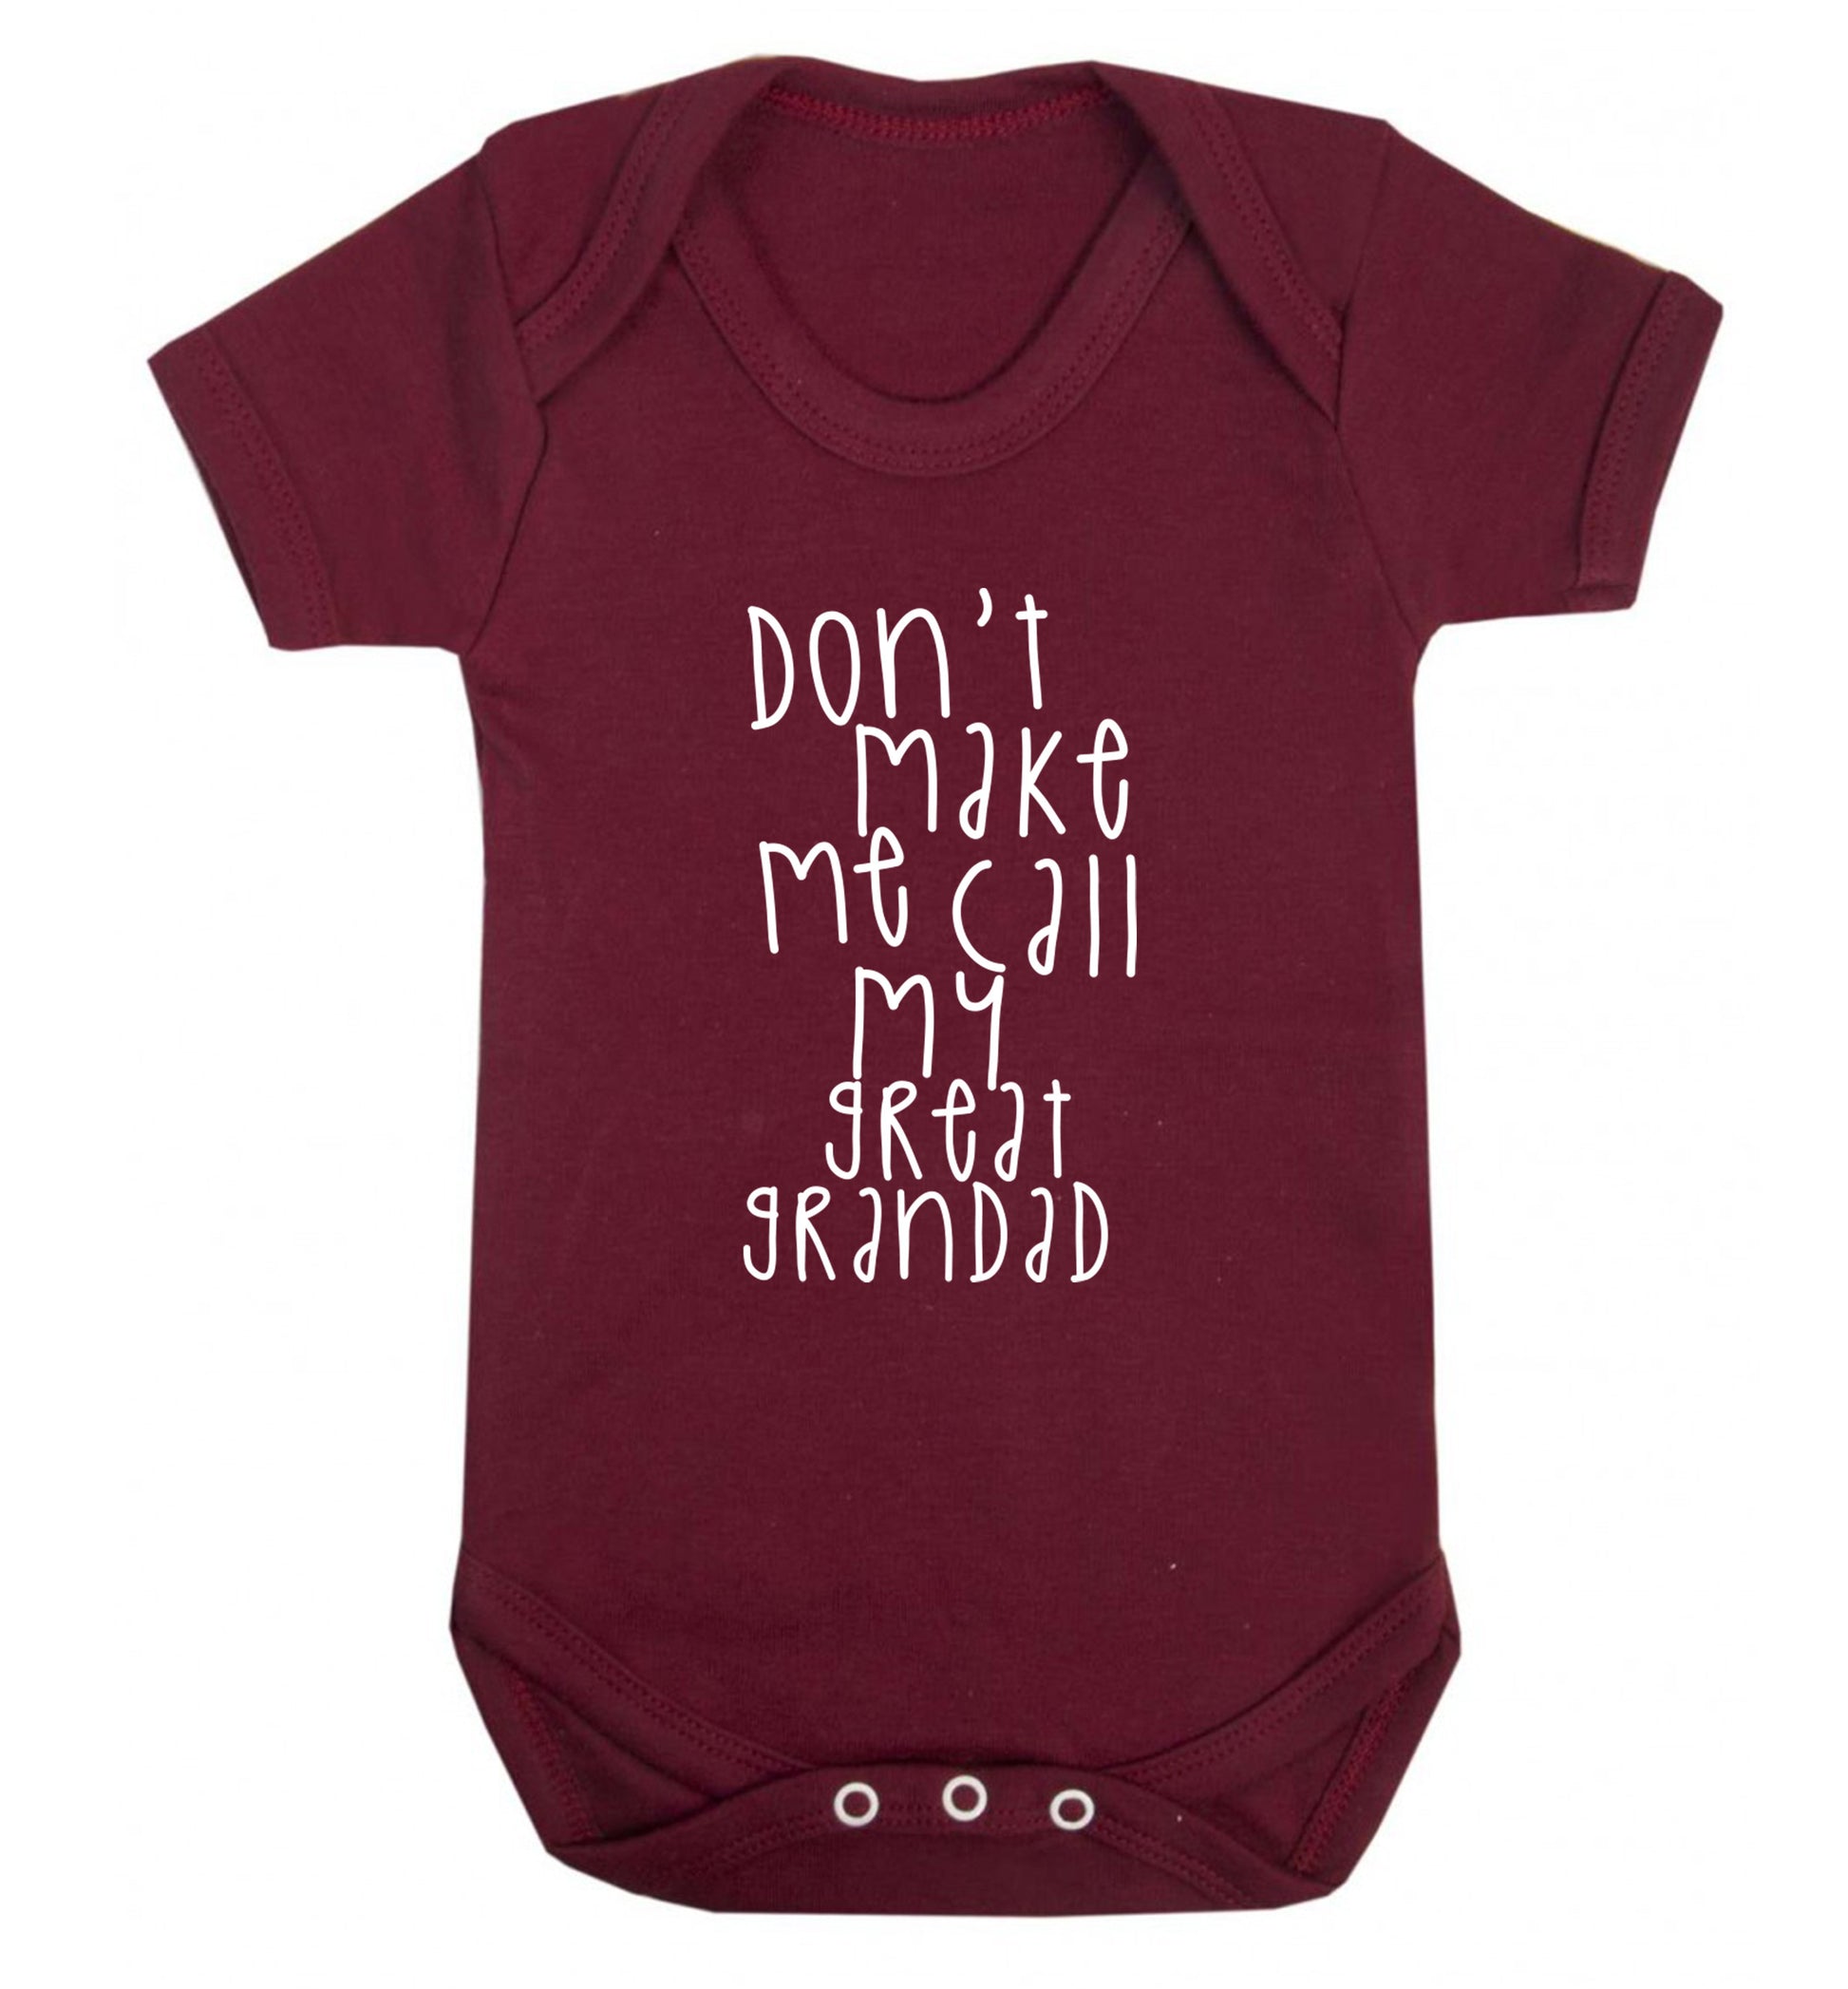 Don't make me call my great grandad Baby Vest maroon 18-24 months